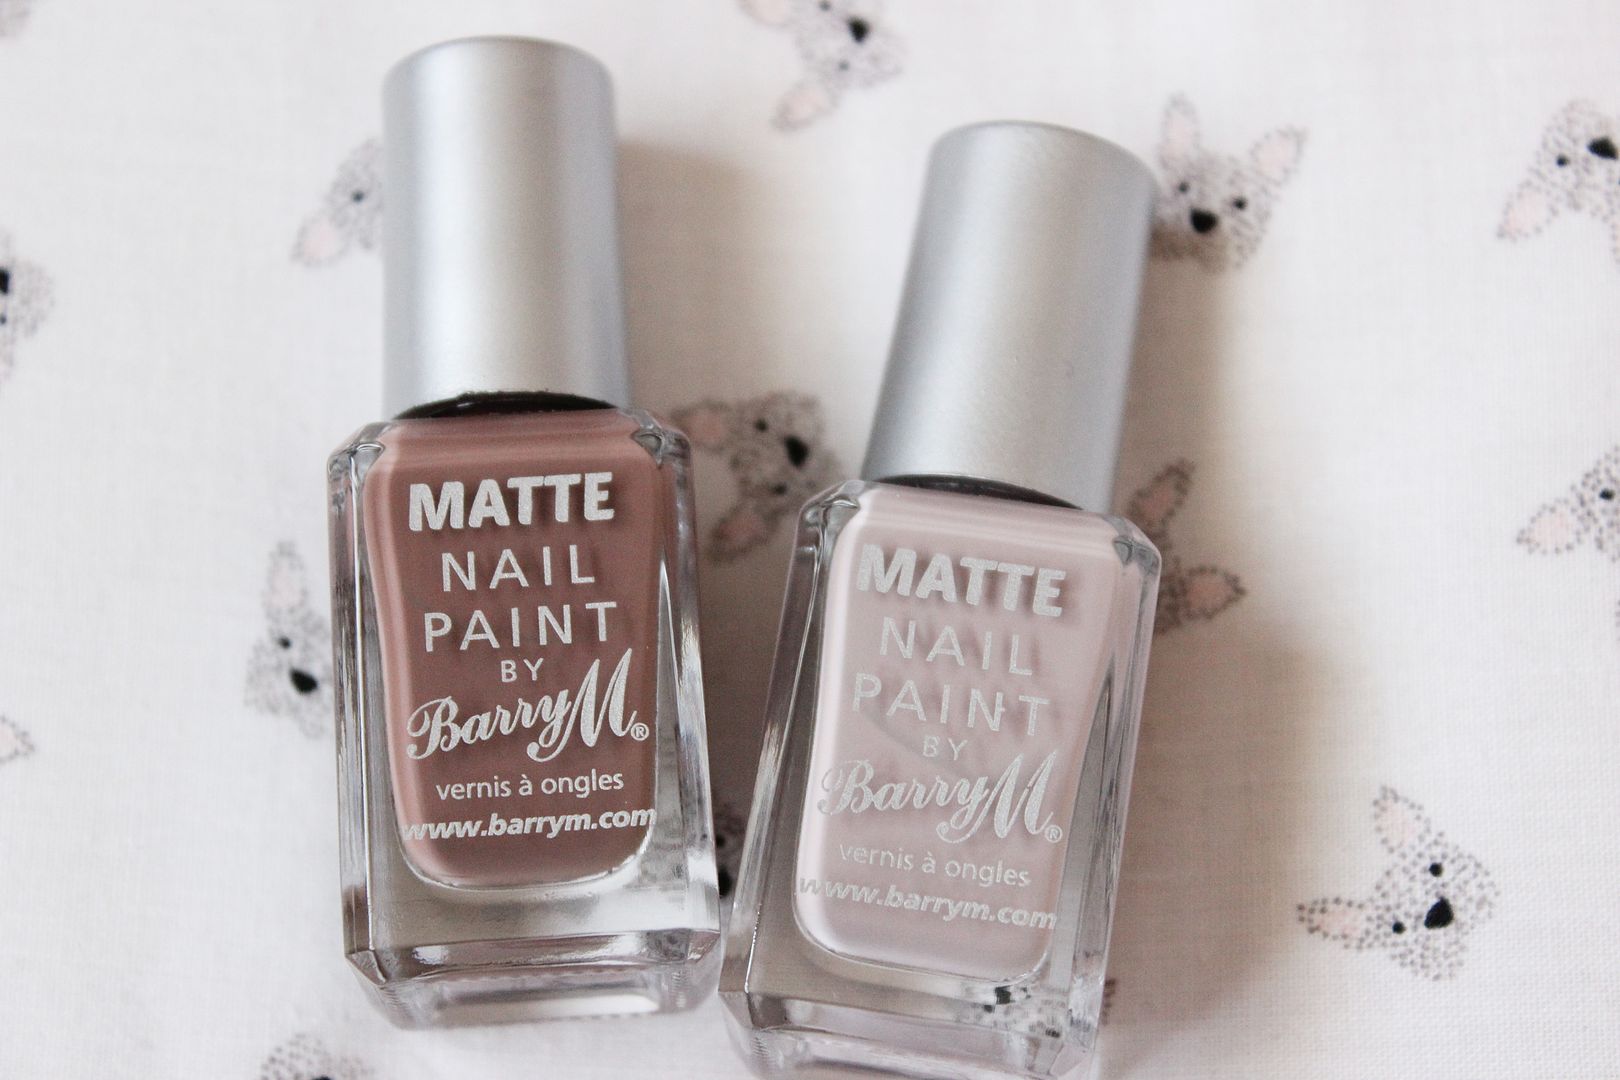 Barry M Matte Nail Polish in Nude Vanilla and Mocha Brown